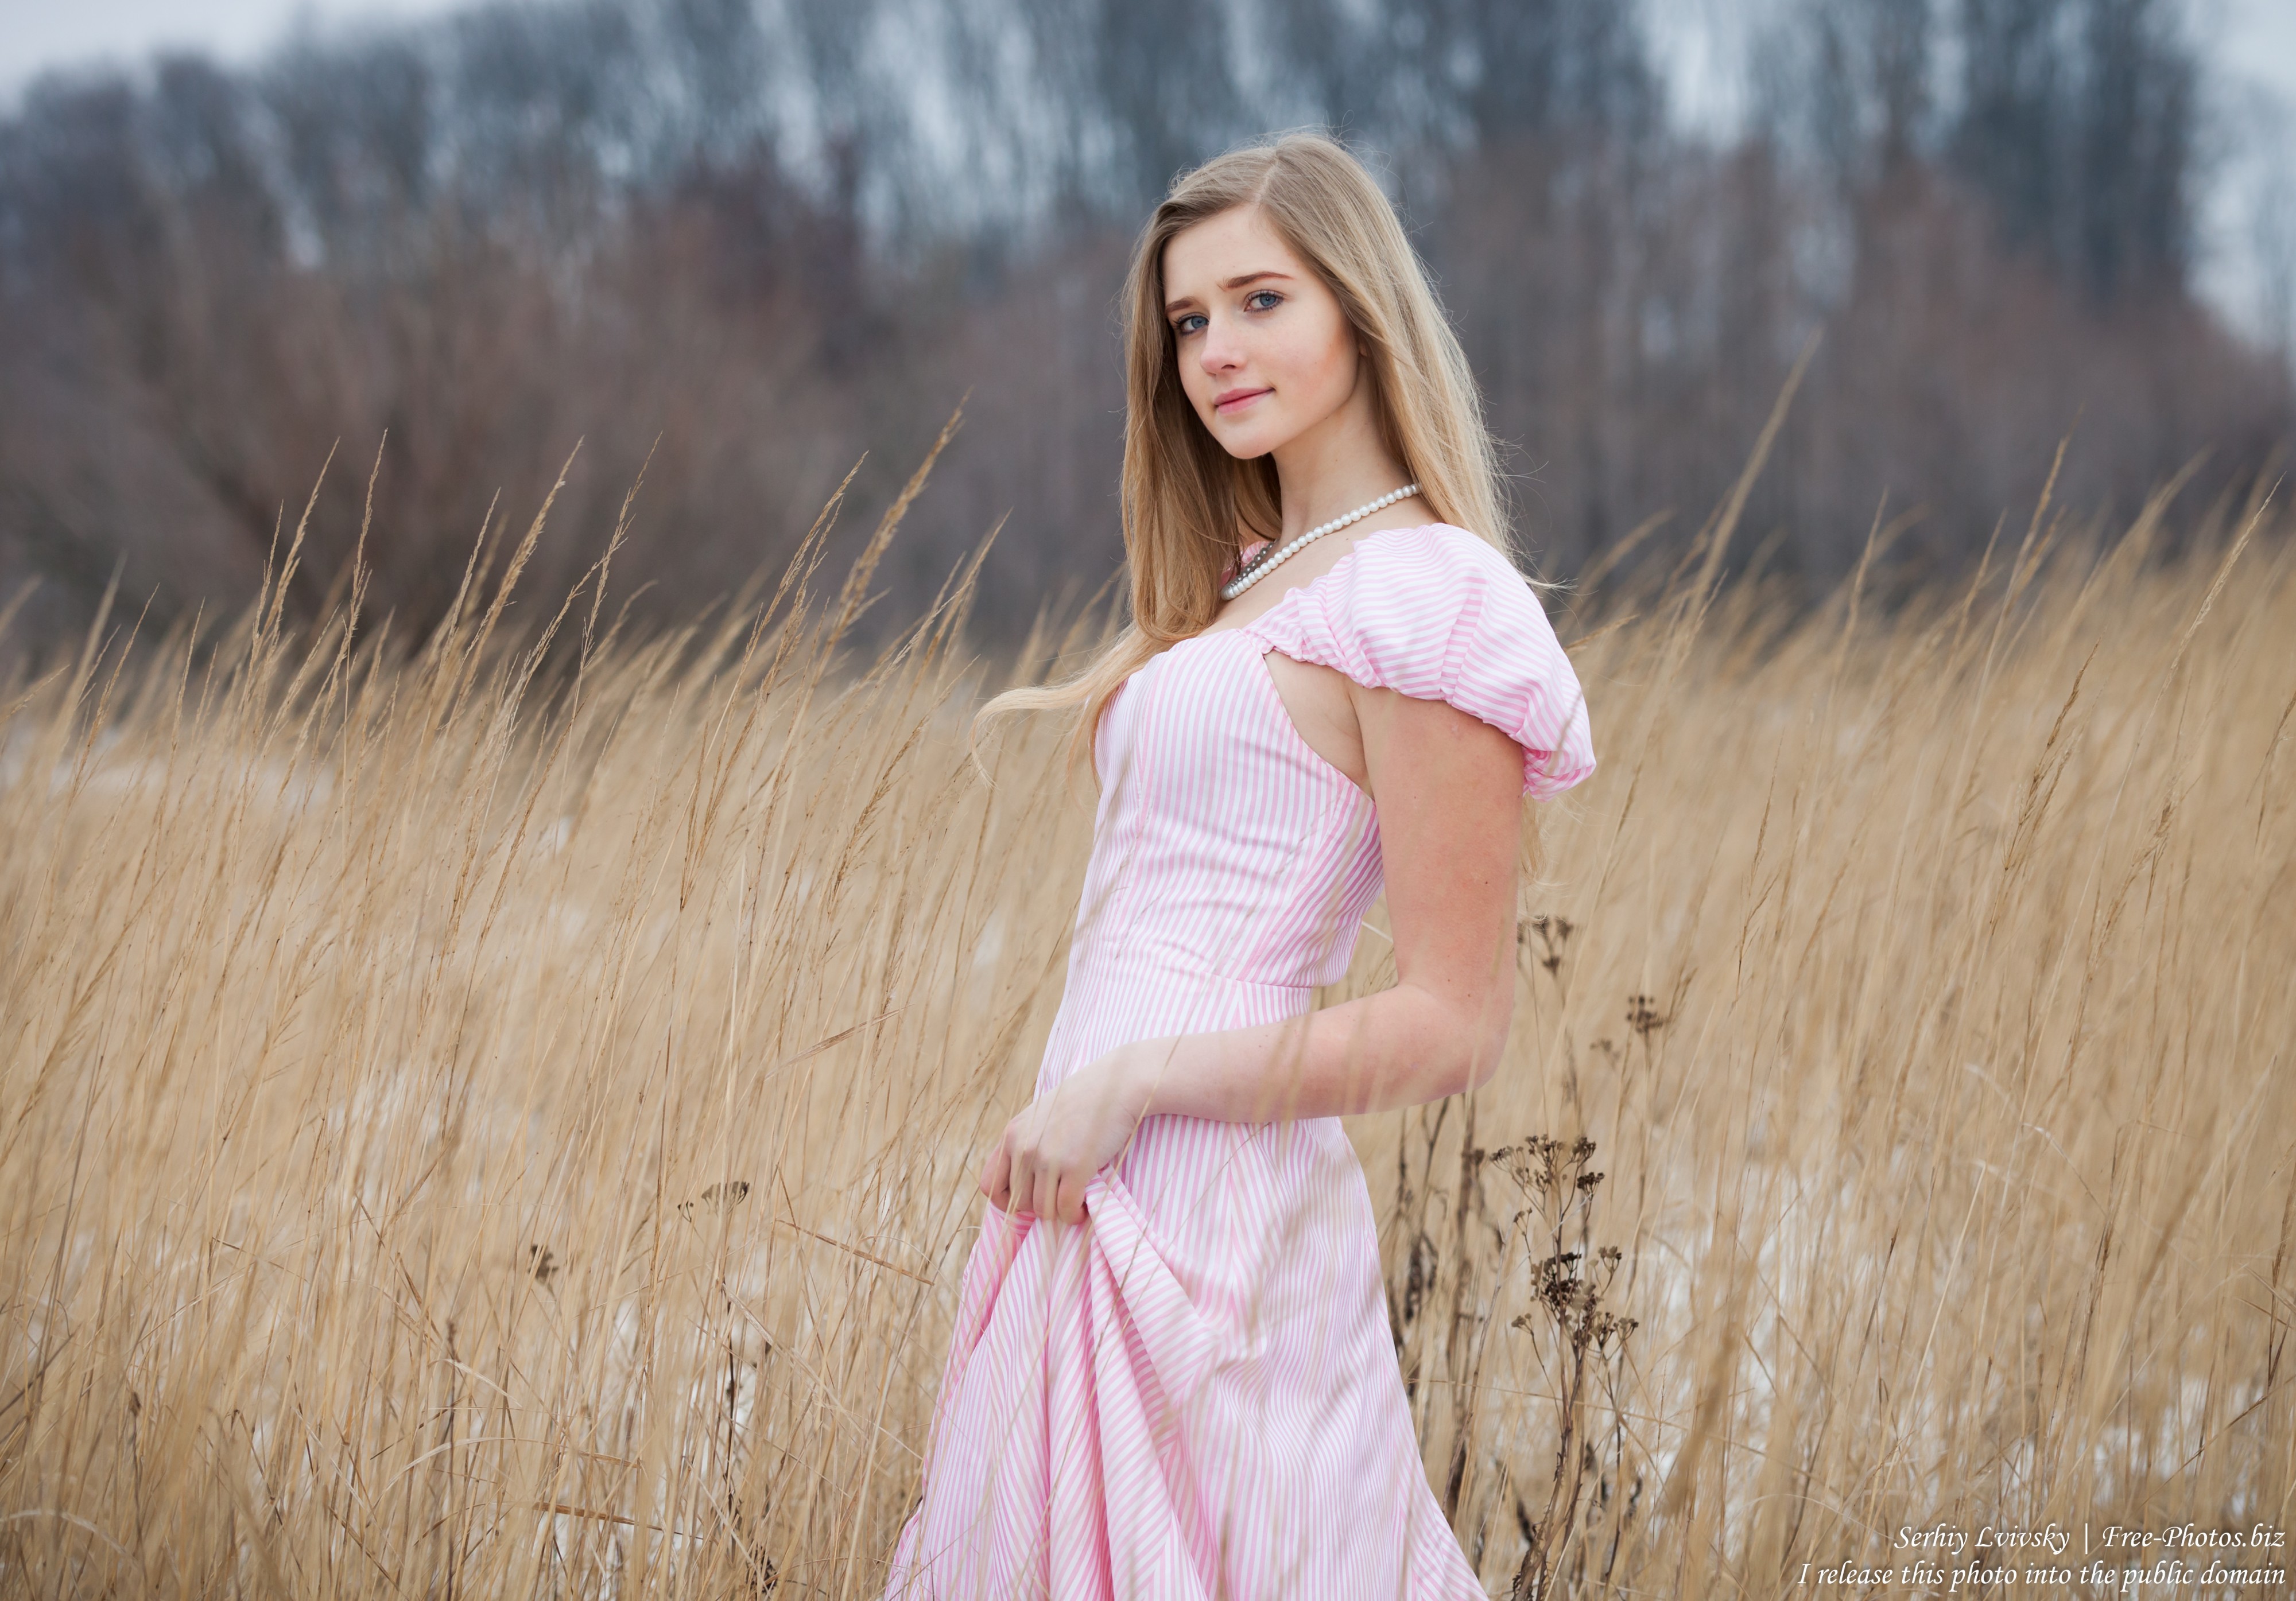 Photo of a natural blond 17-year-old girl photographed by Serhiy.